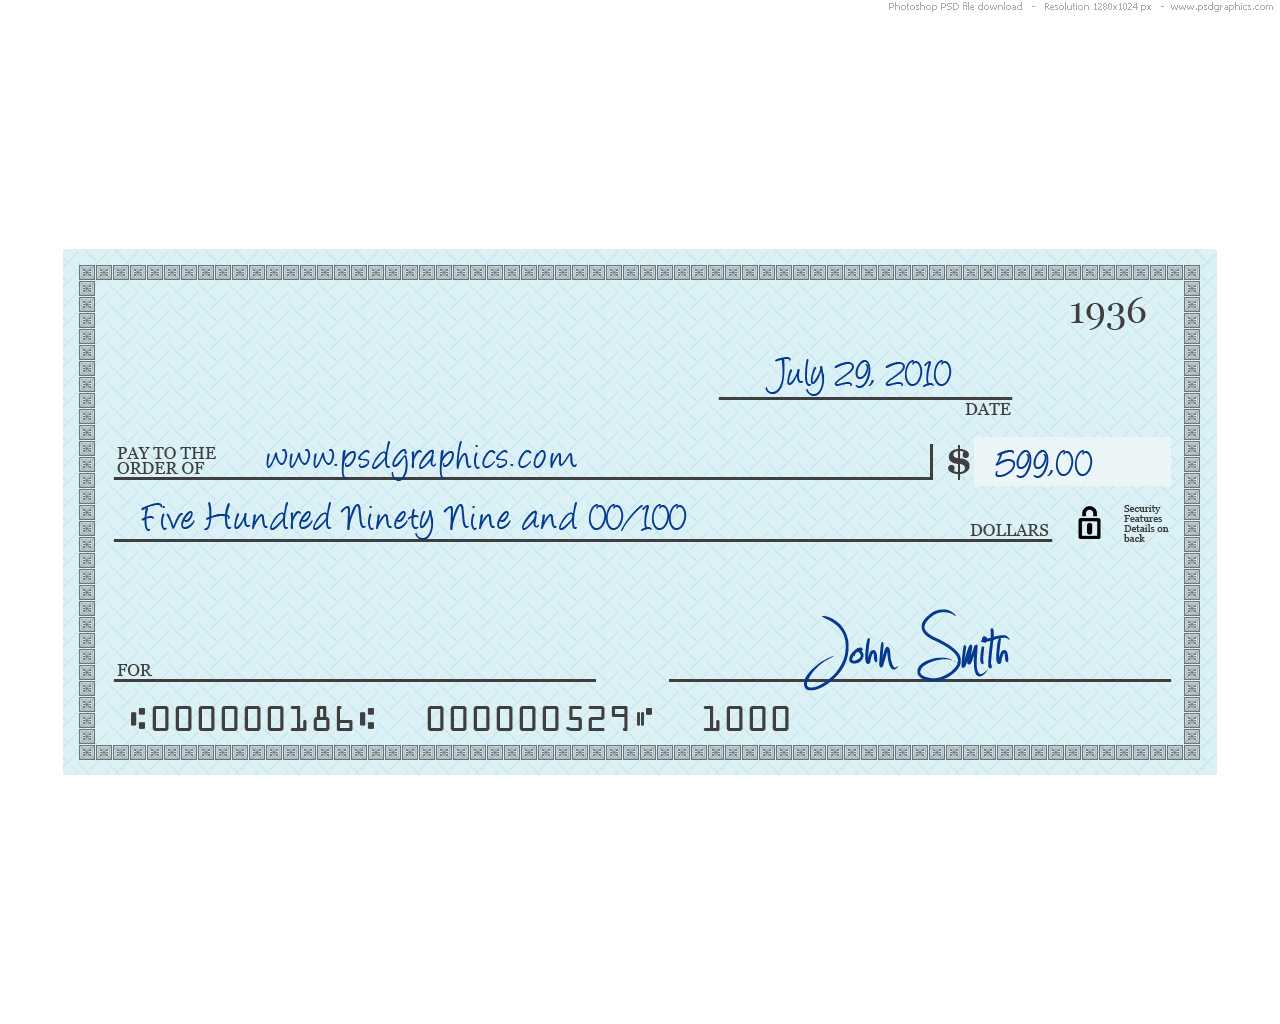 014 Free Blank Business Check Template Good Of Dummy Cheque Regarding Blank Check Templates For Microsoft Word